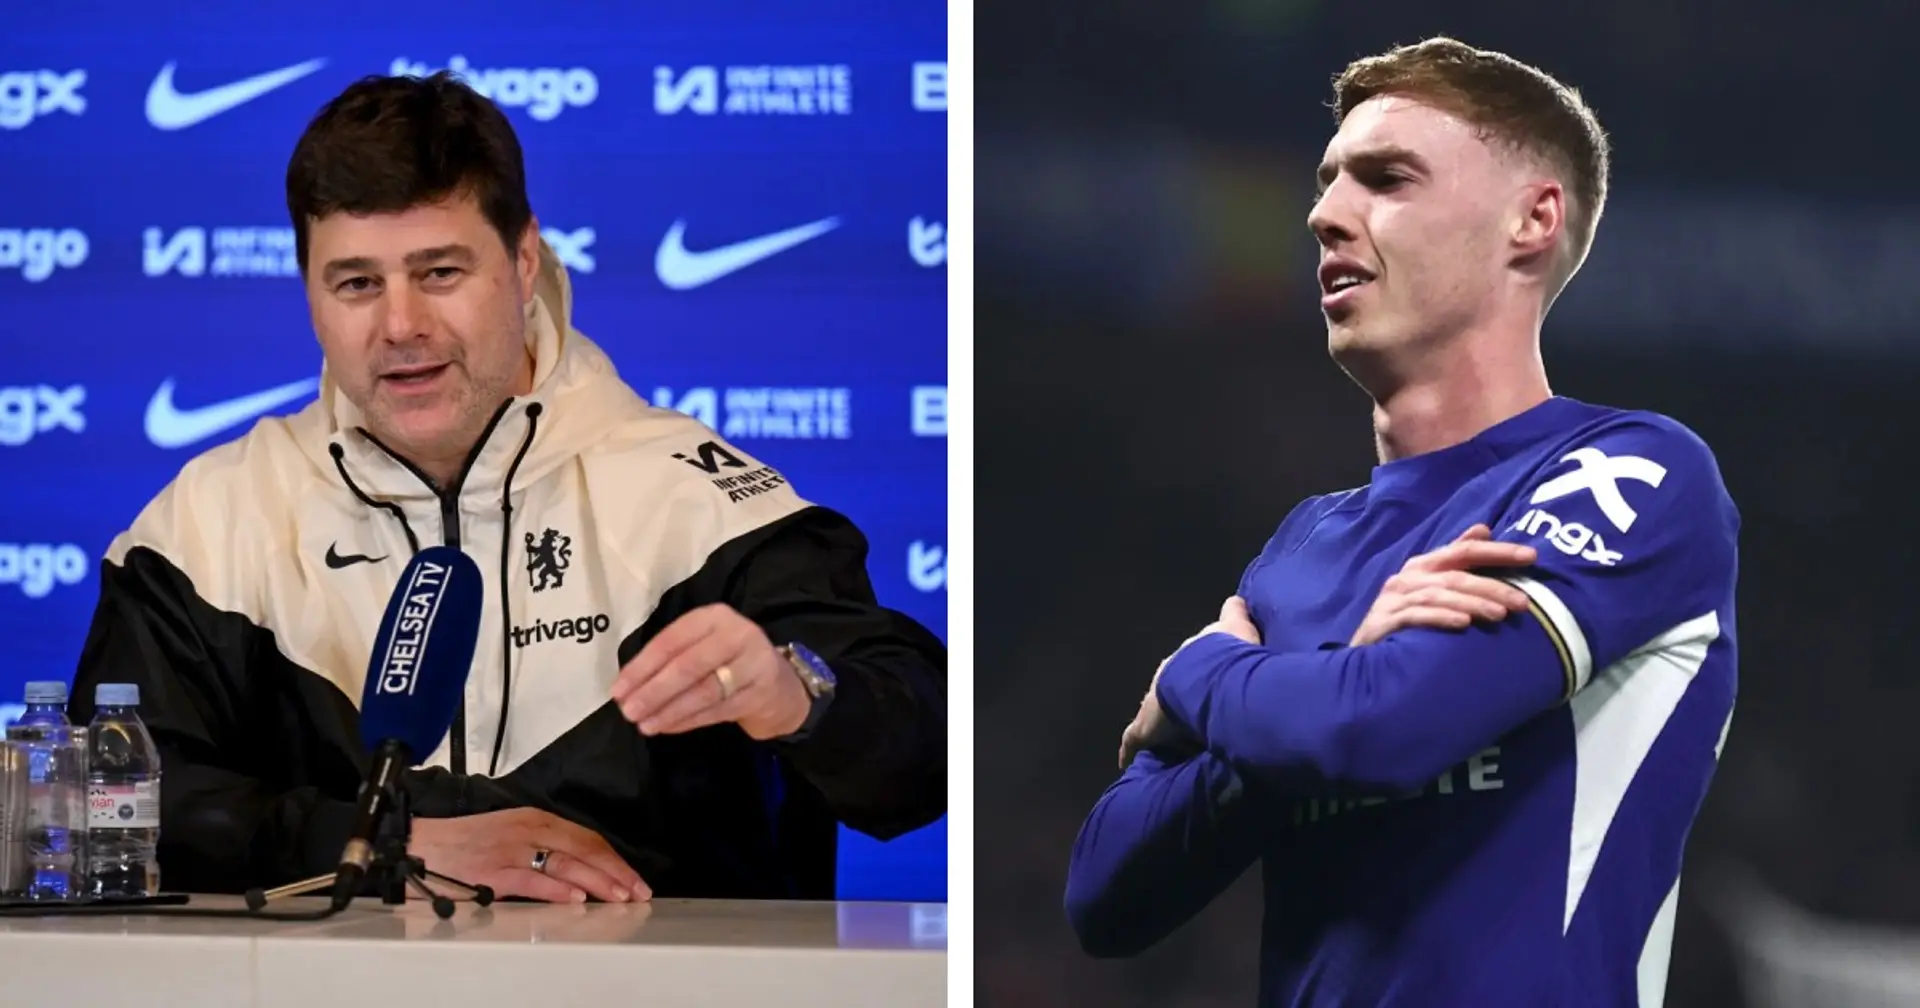 'He's a player that's doing well': Pochettino opens up about whether Palmer needs new contract